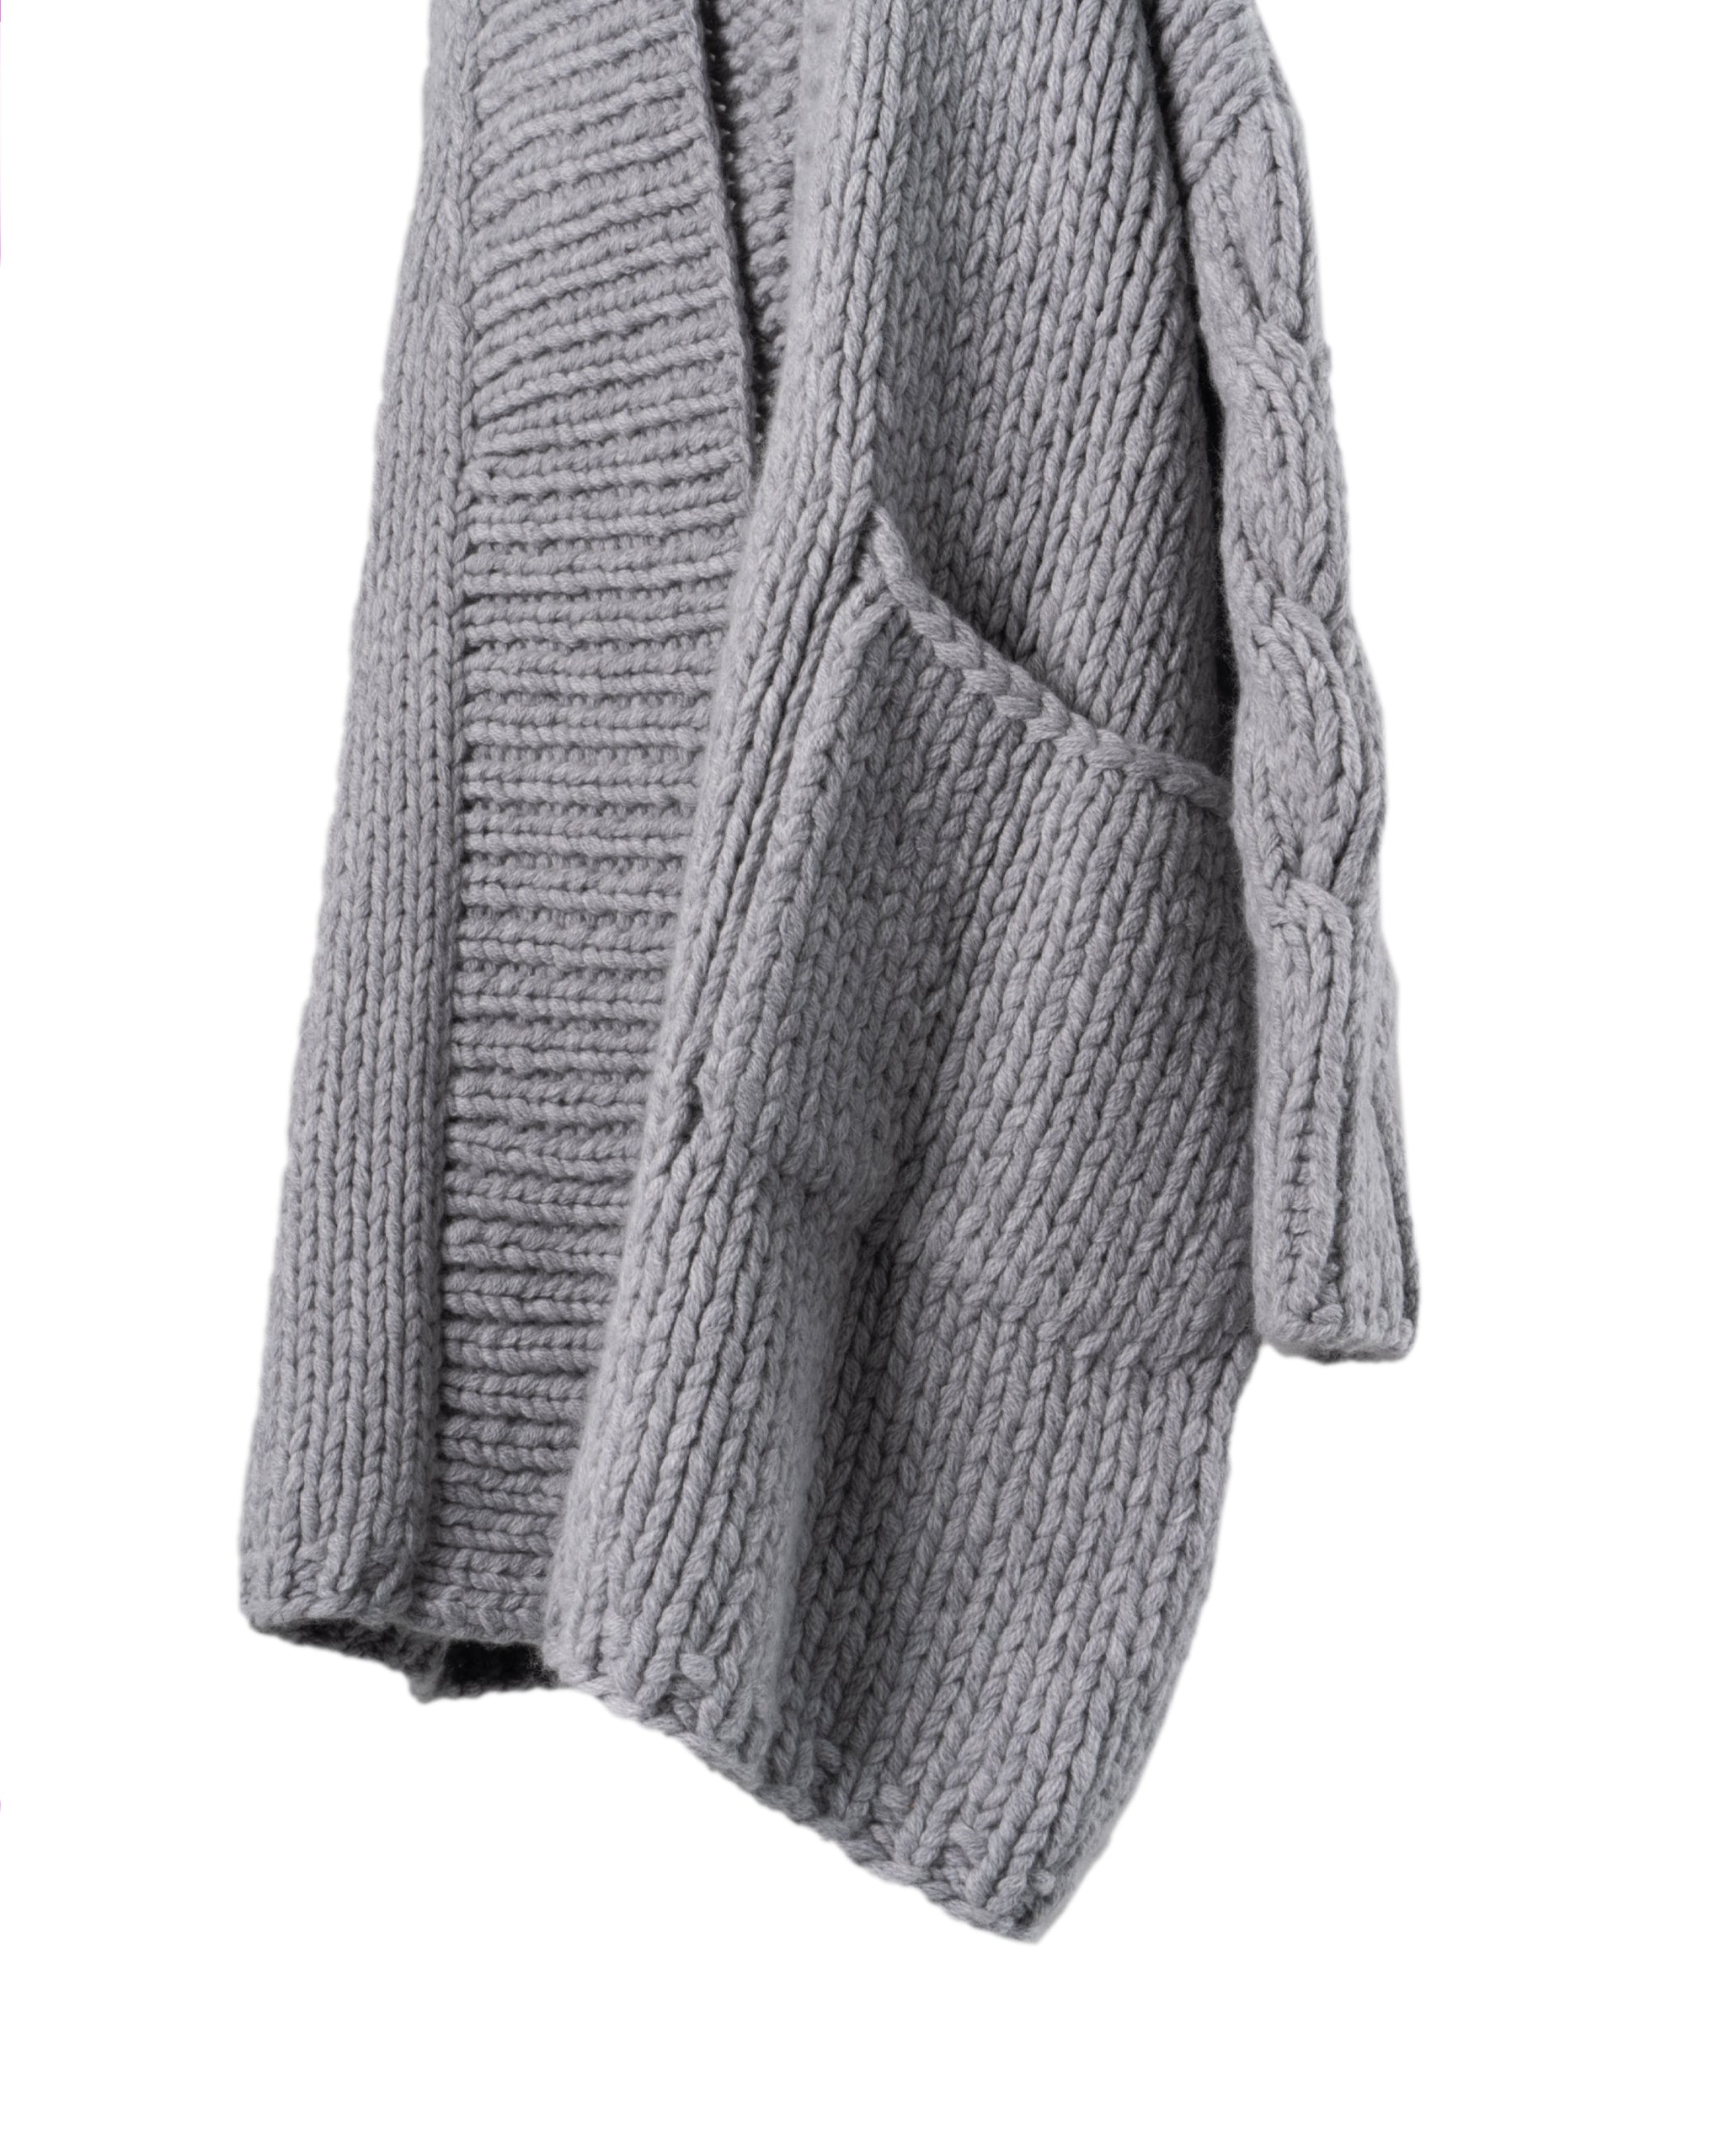 ONE GAGE CHUNKY CABLE CARDIGAN